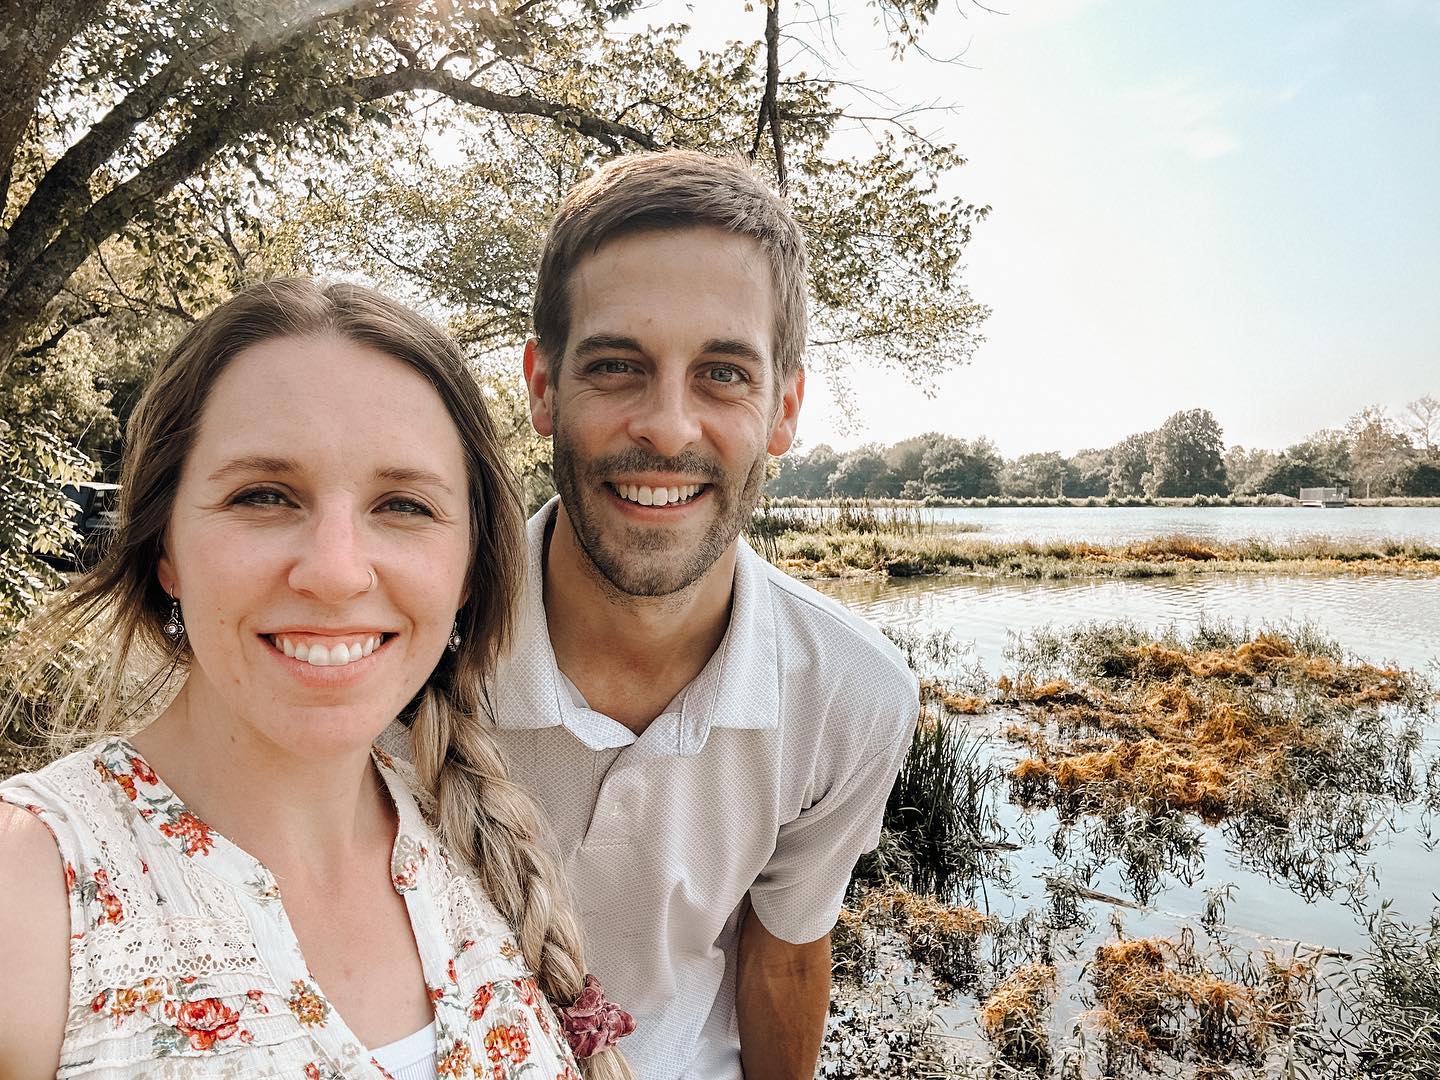 Jill Duggar reveals how her husband, plus therapy, helped her identify  faith 'triggers' and 'sort things out